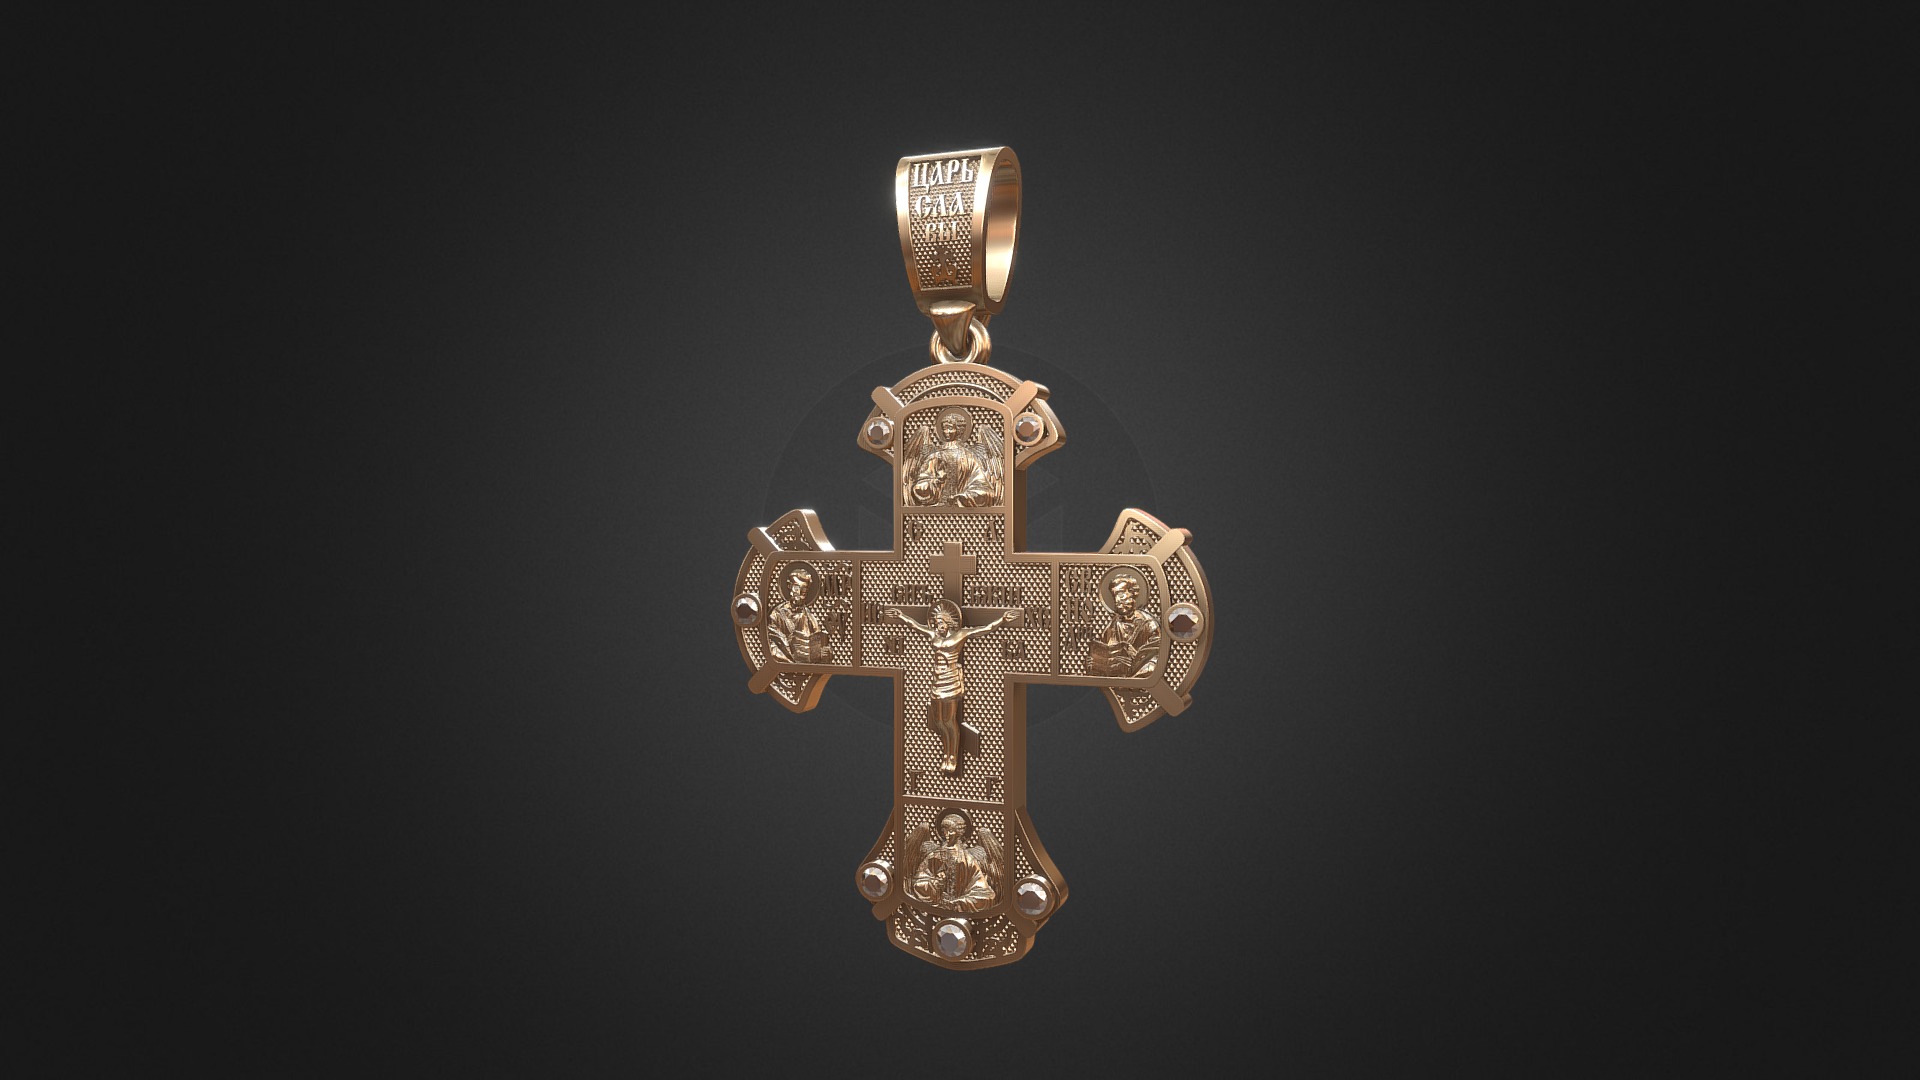 3D model 964 – Cross - This is a 3D model of the 964 - Cross. The 3D model is about a gold and black cross.